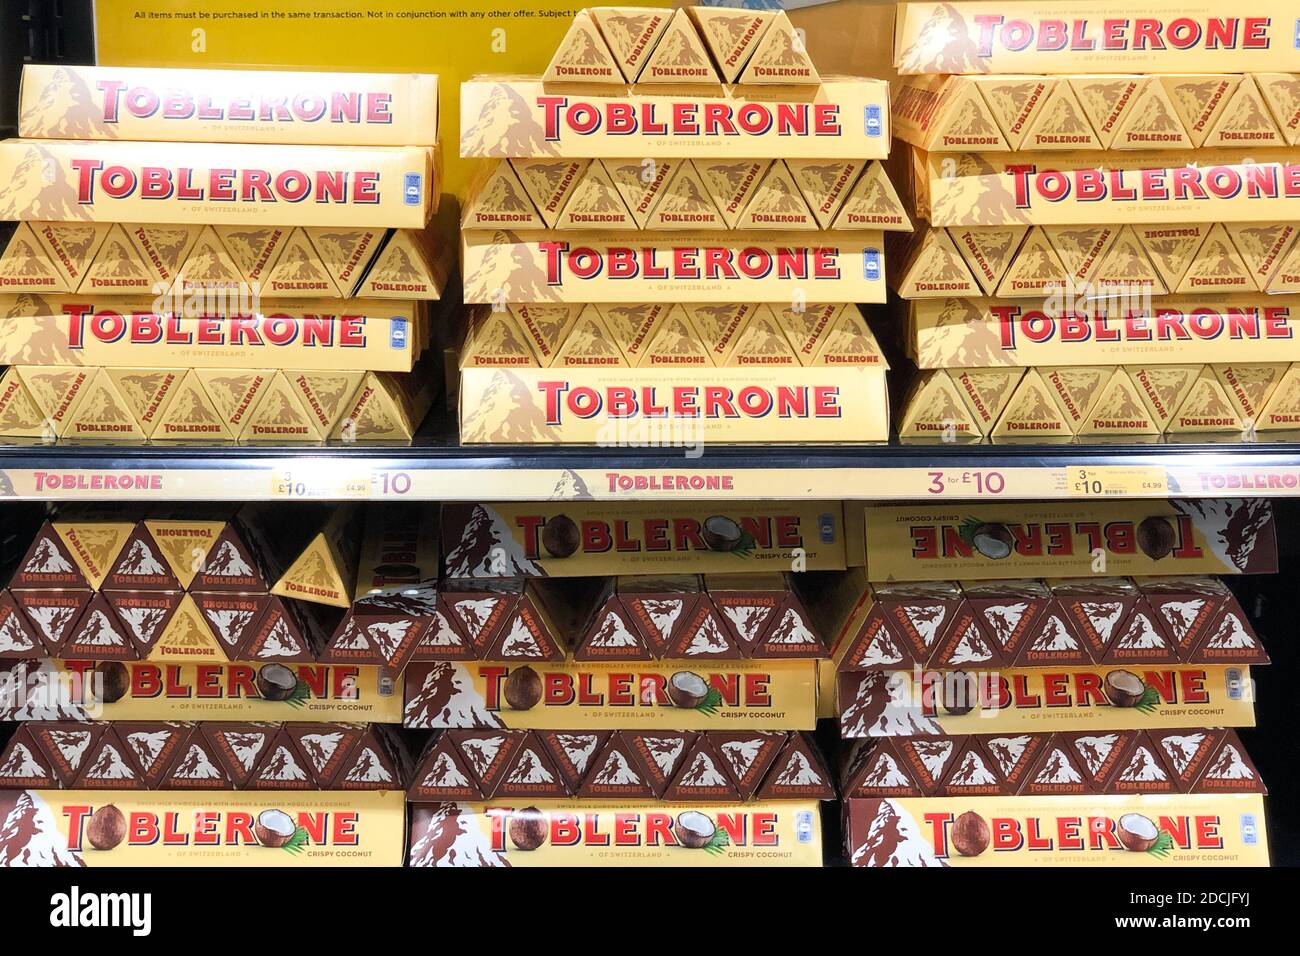 Shoppers disgusted at price of Costco giant Toblerone - 'Why would anyone  pay that' - Derbyshire Live